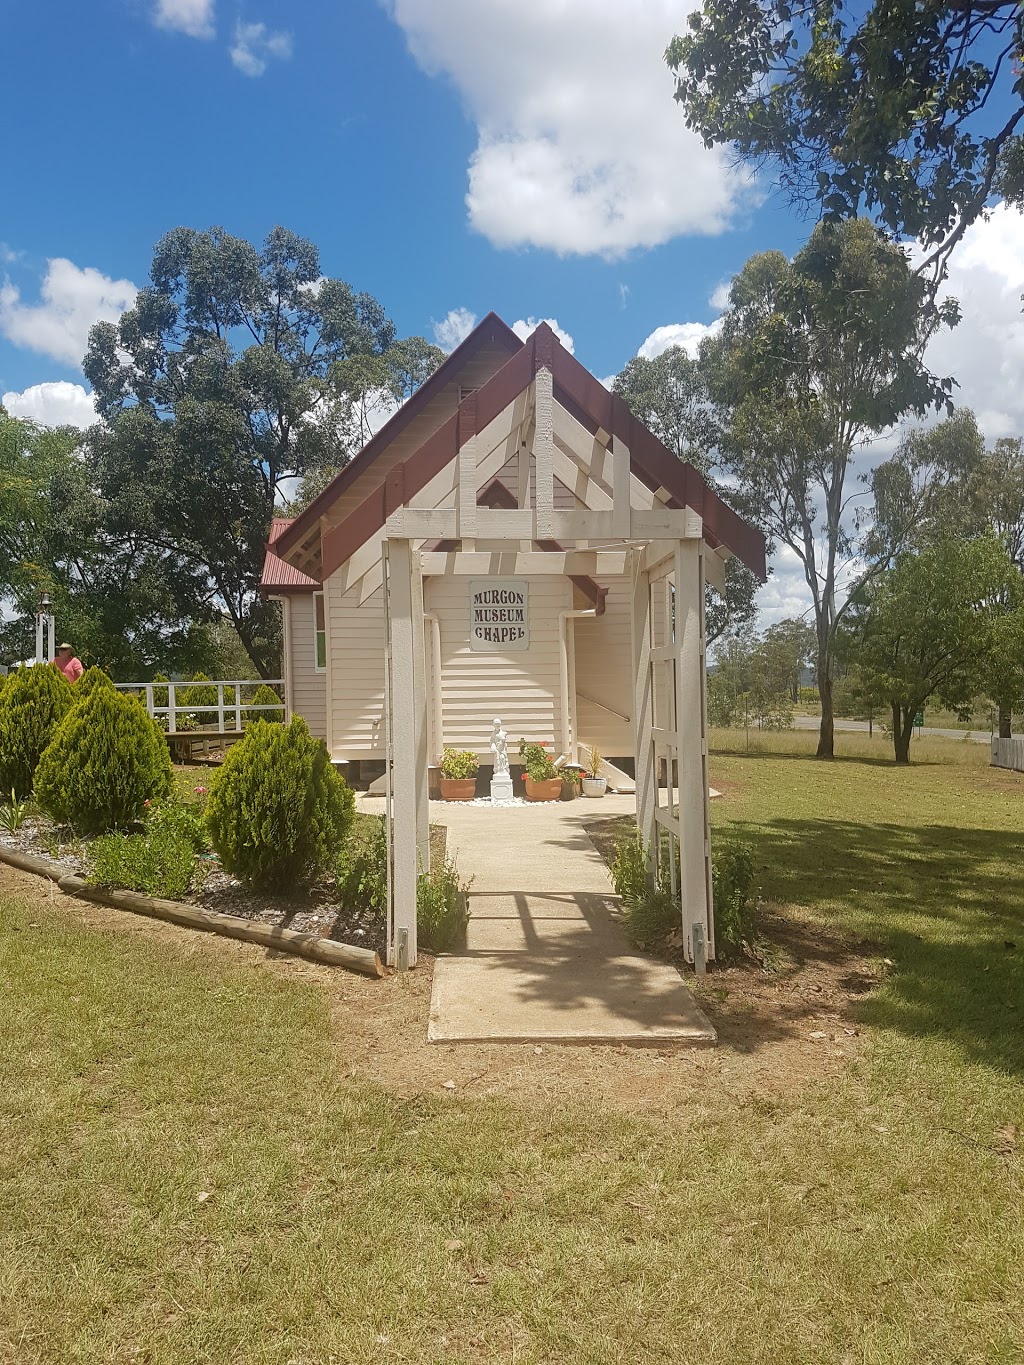 The Queensland Dairy & Heritage Museum | museum | 2 Sommerville St, Murgon QLD 4605, Australia | 0741695001 OR +61 7 4169 5001